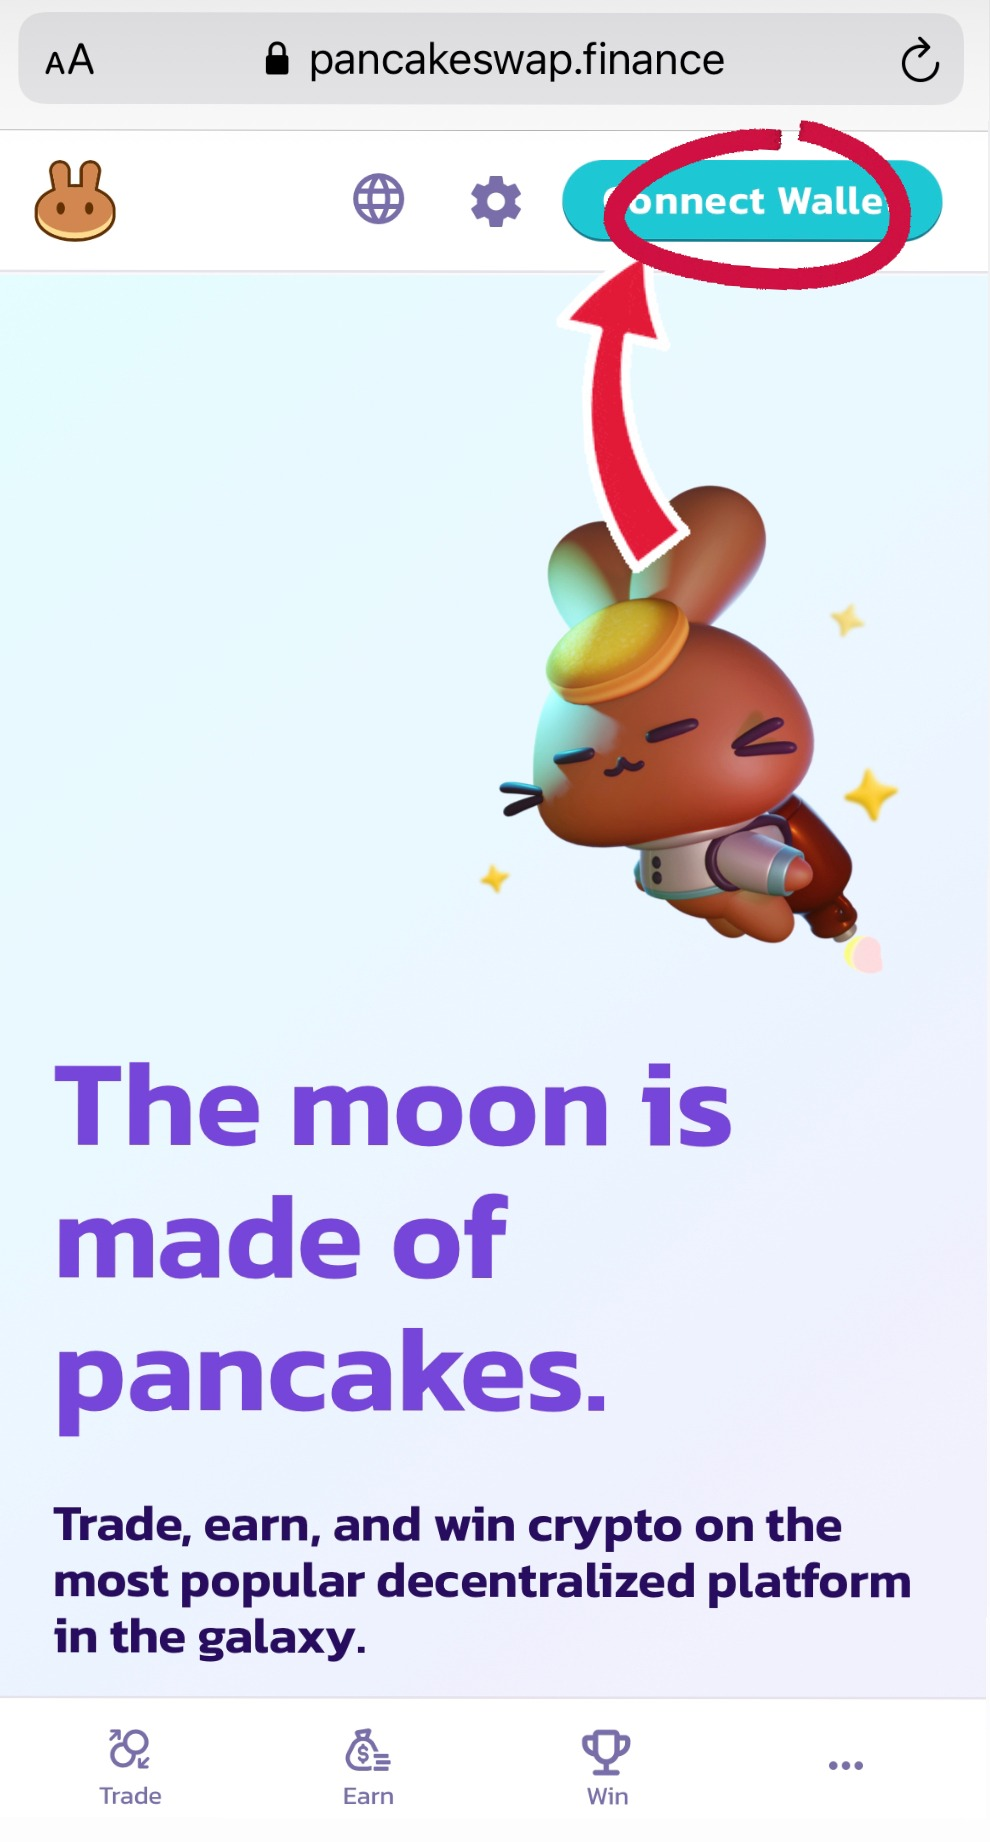 The next step is to connect our wallet to the pancake swap, click  "Connect wallet"